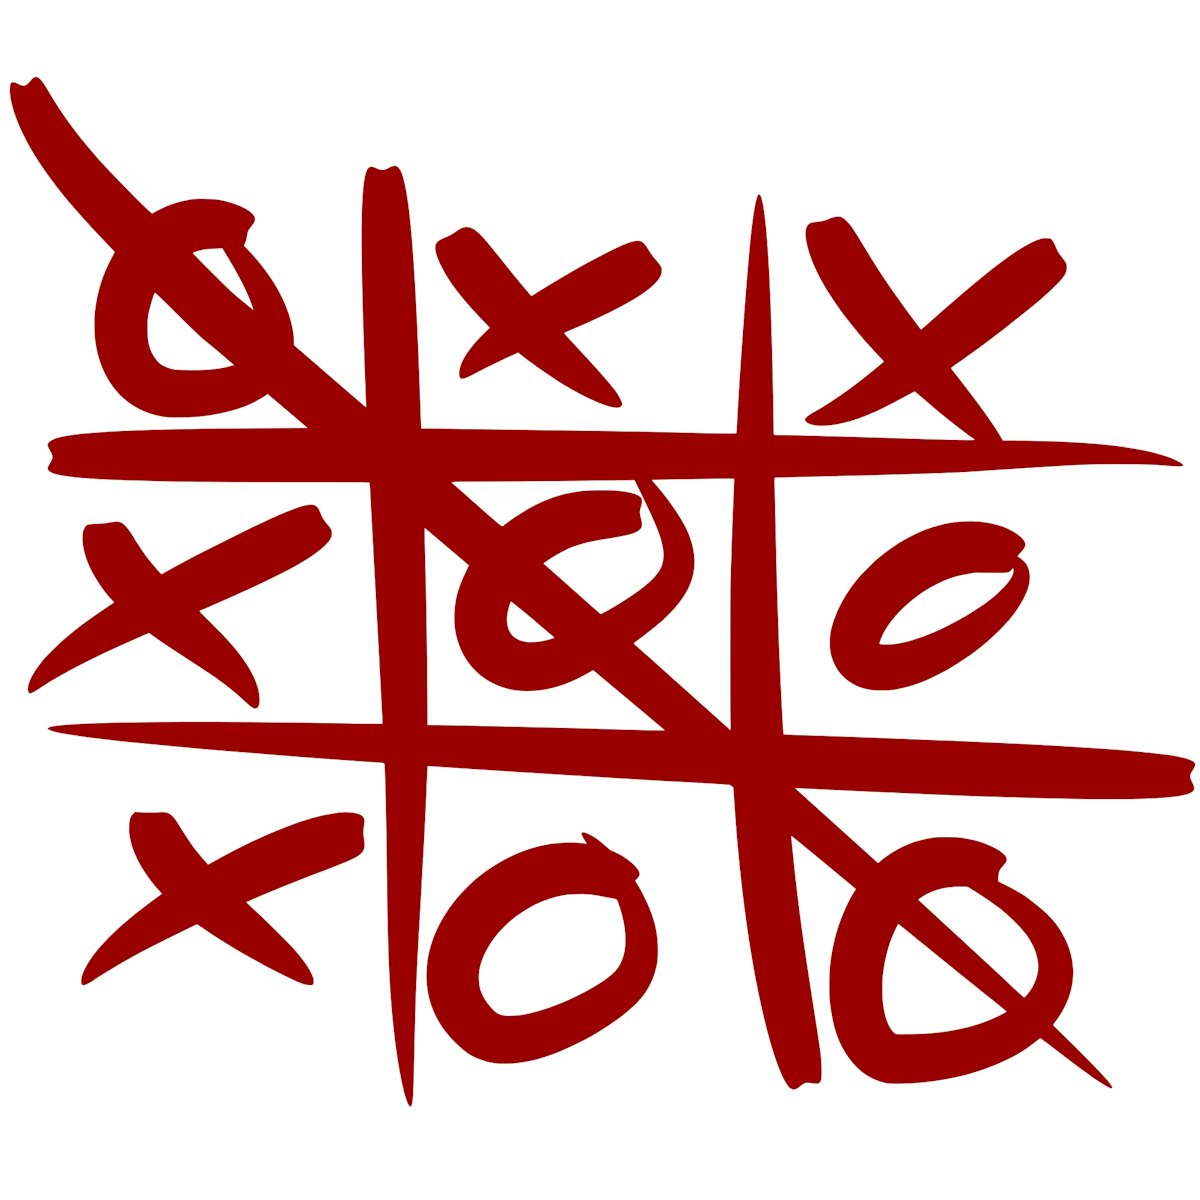 Improve your business results by using tic-tac-toe strategyreally!